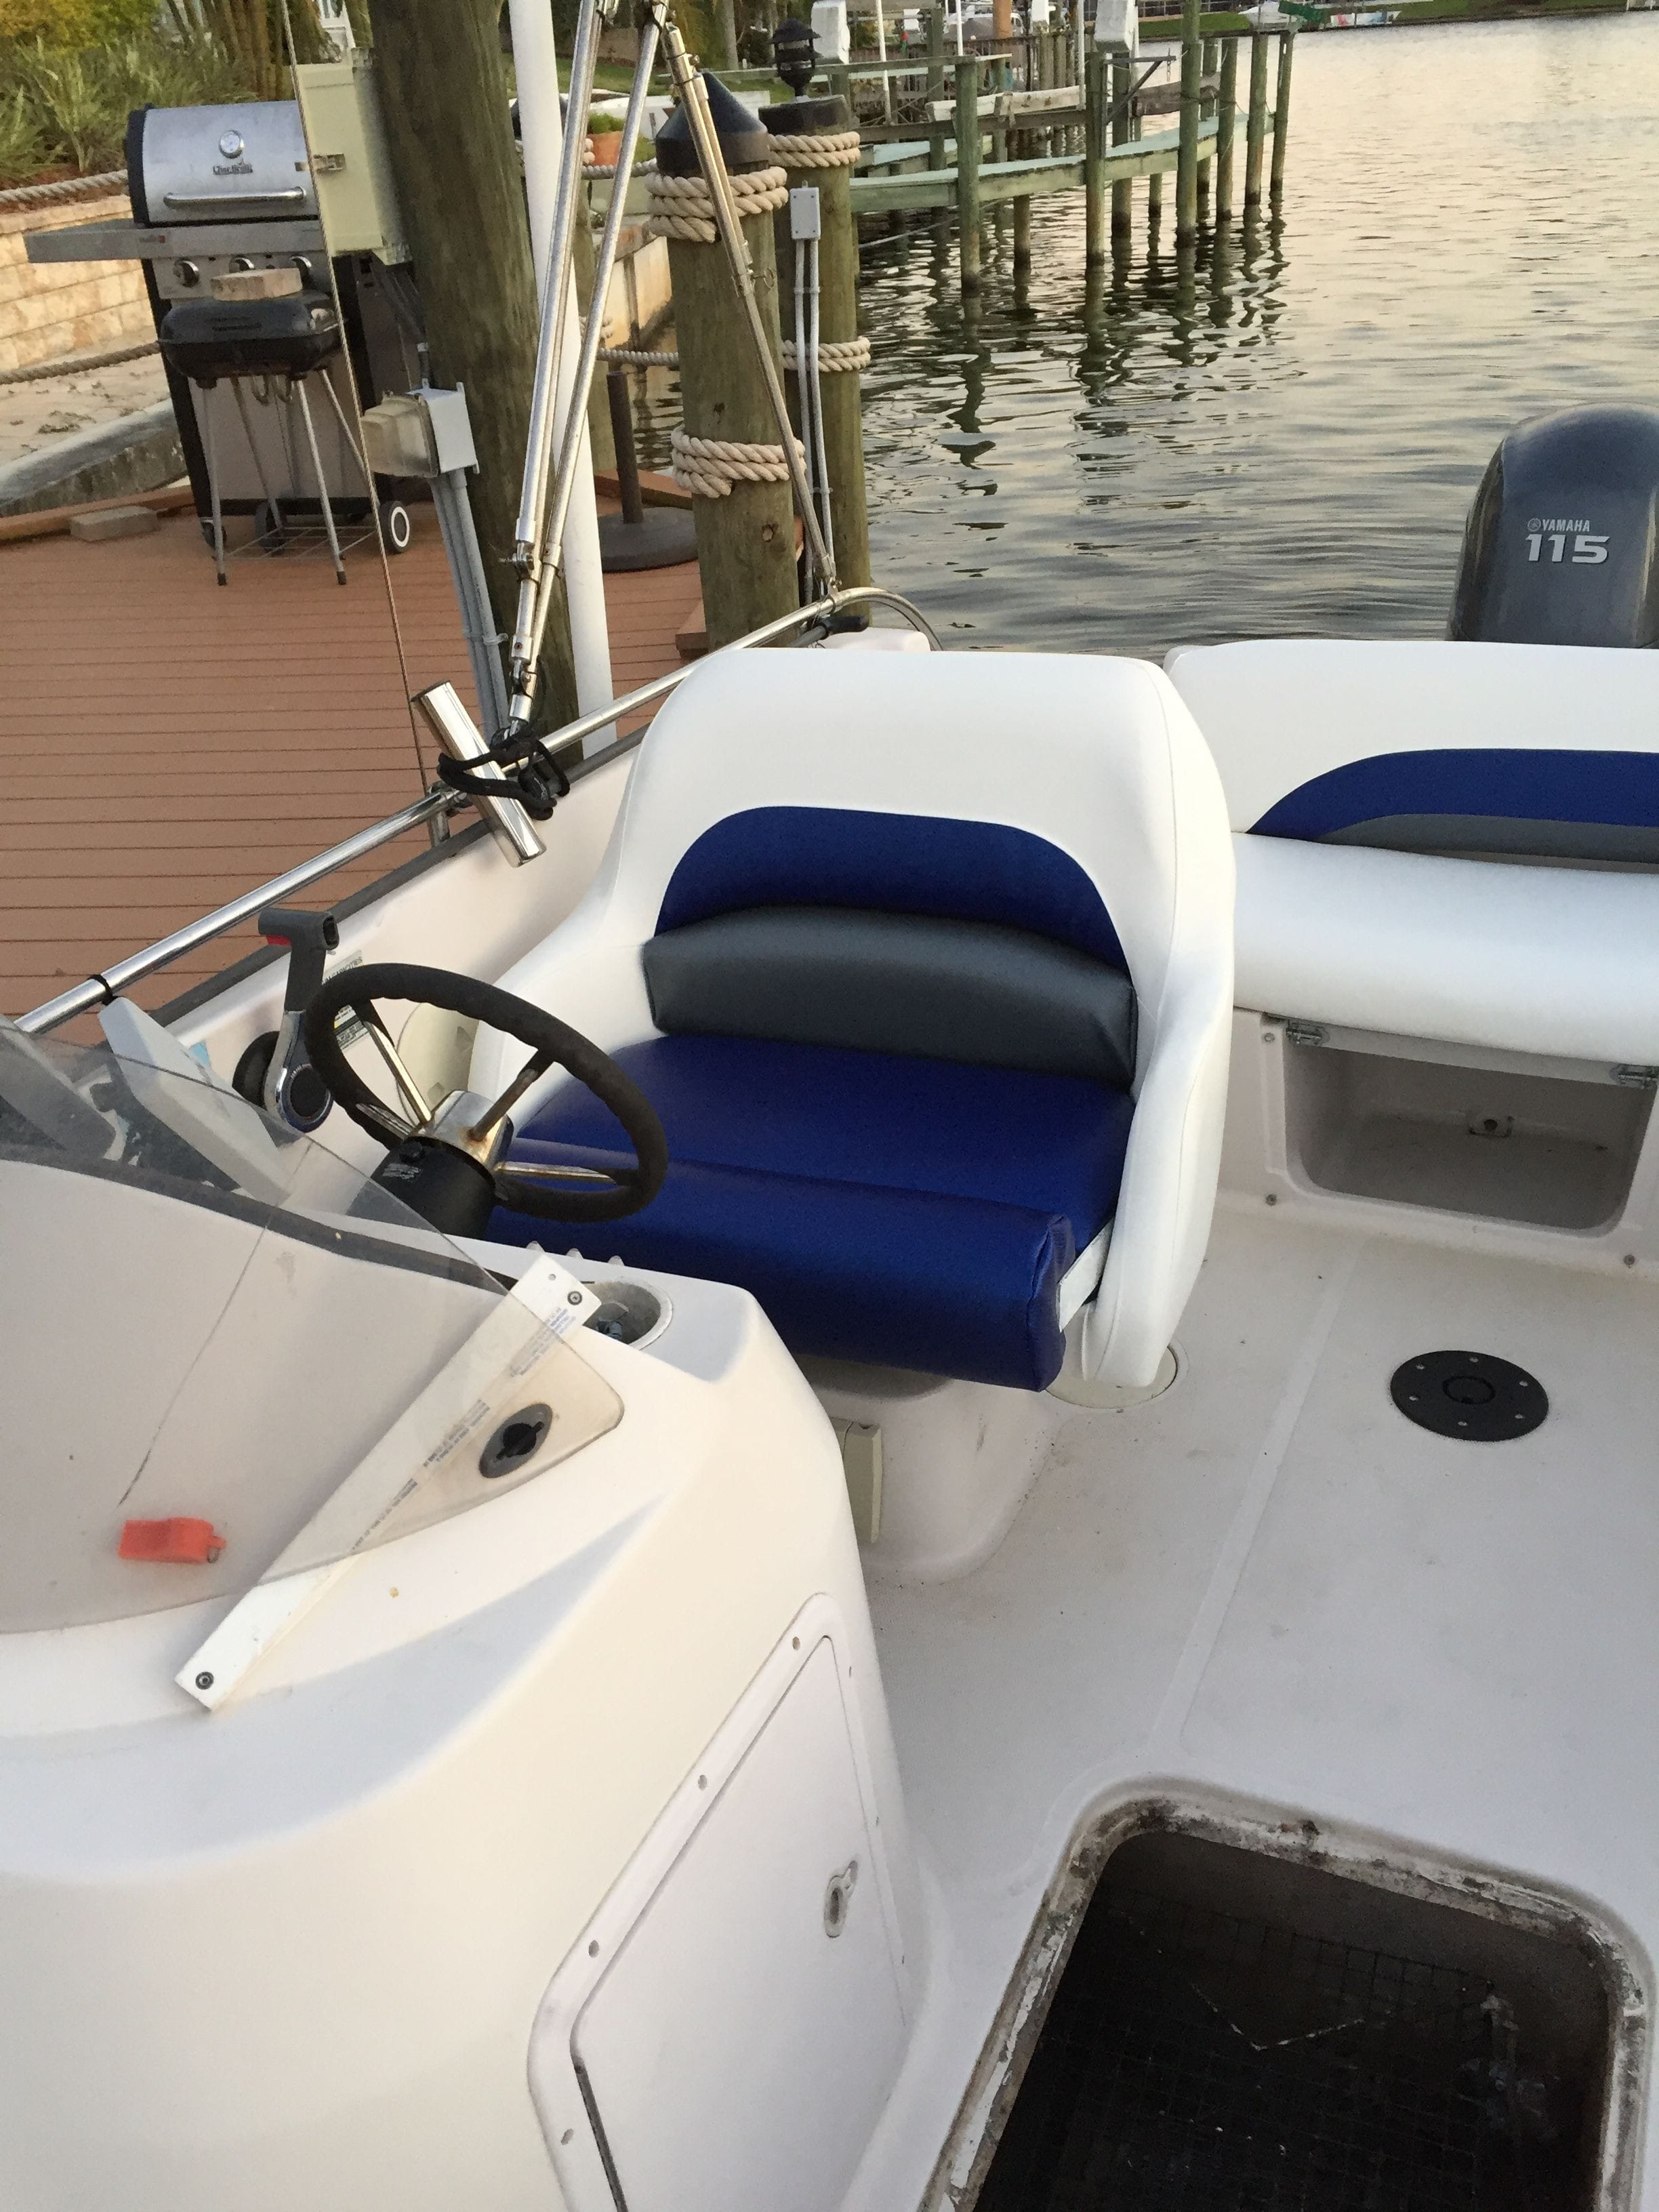 Boat Seat Upholstery